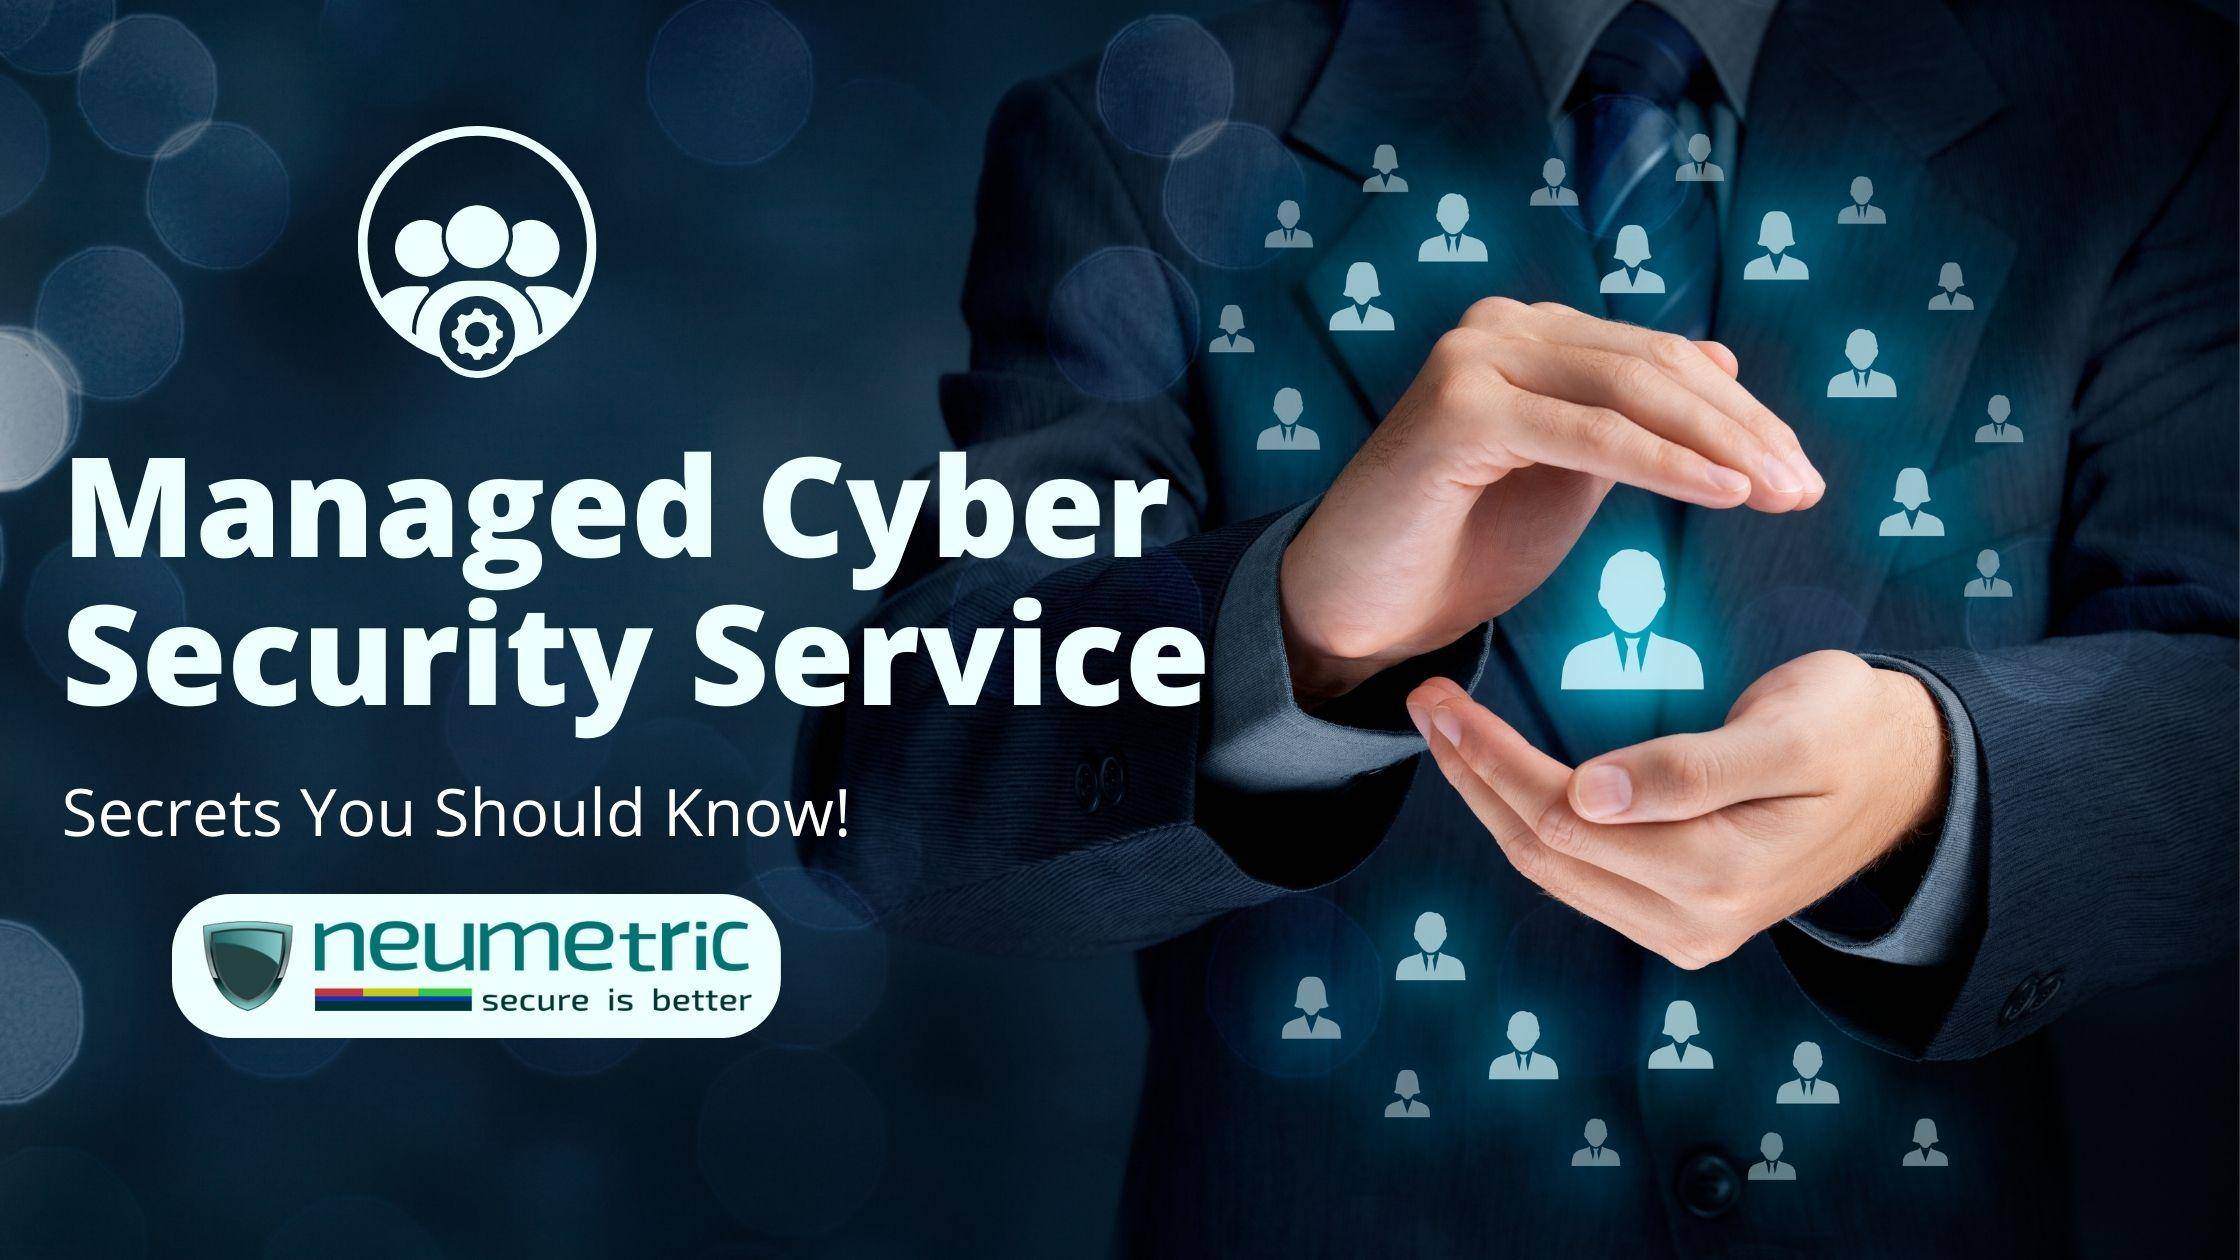 Managed Cyber Security Service: Secrets You Should Know